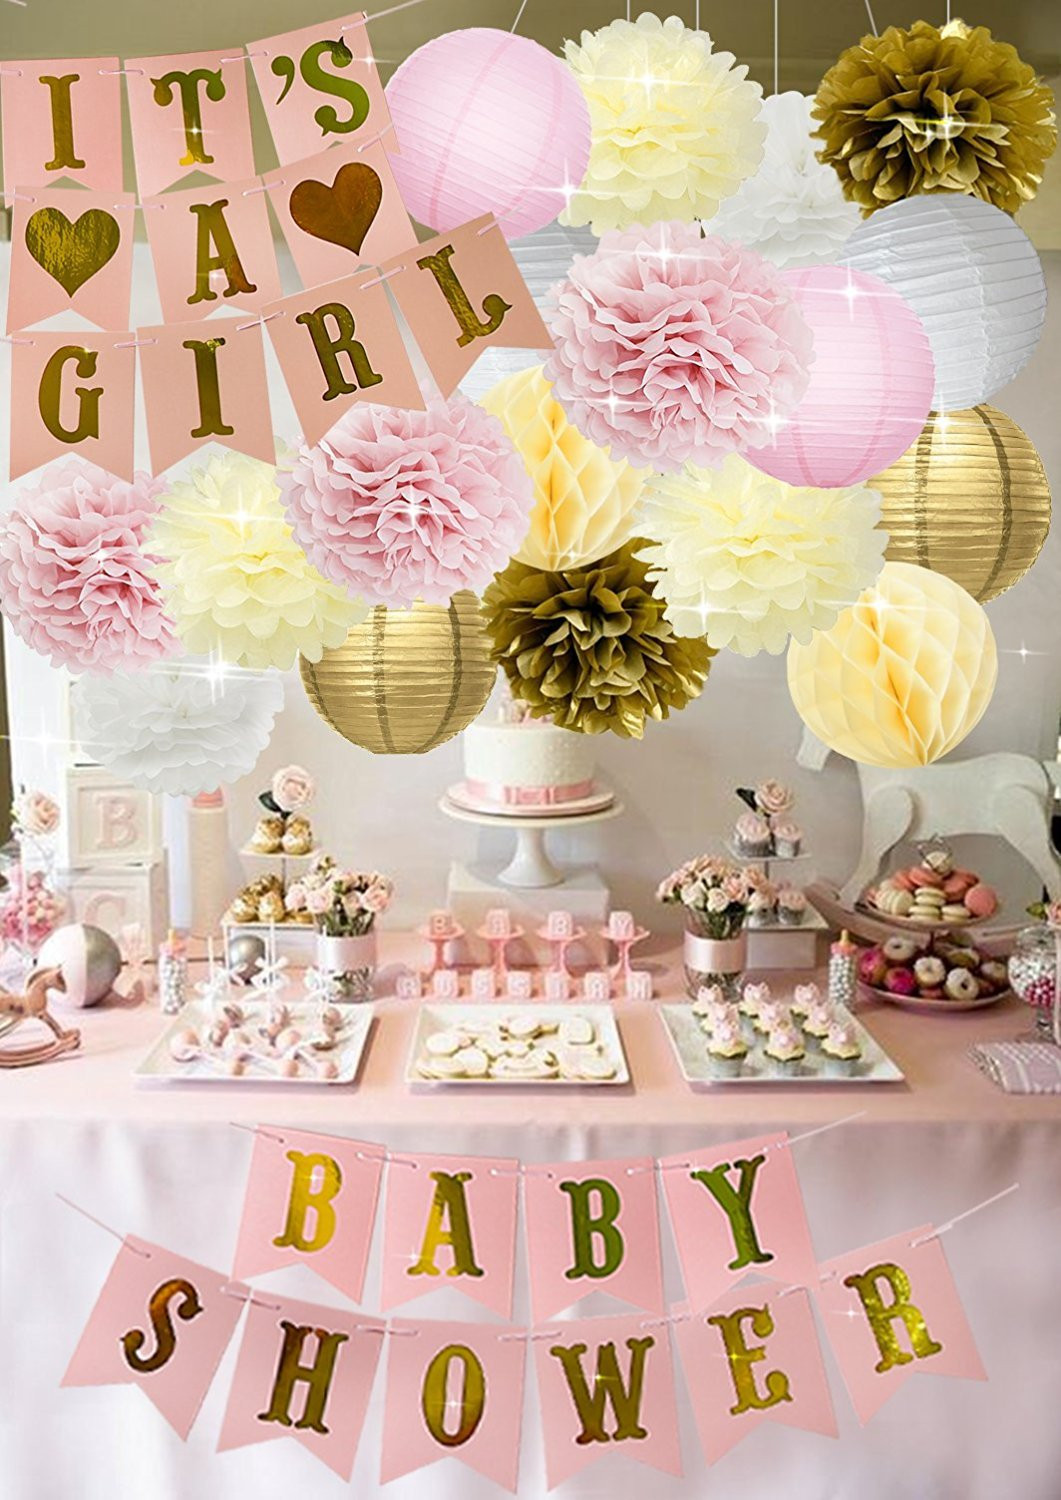 Baby Girl Shower Decorating Ideas
 Baby Shower Decorations BABY SHOWER IT S A GIRL Garland